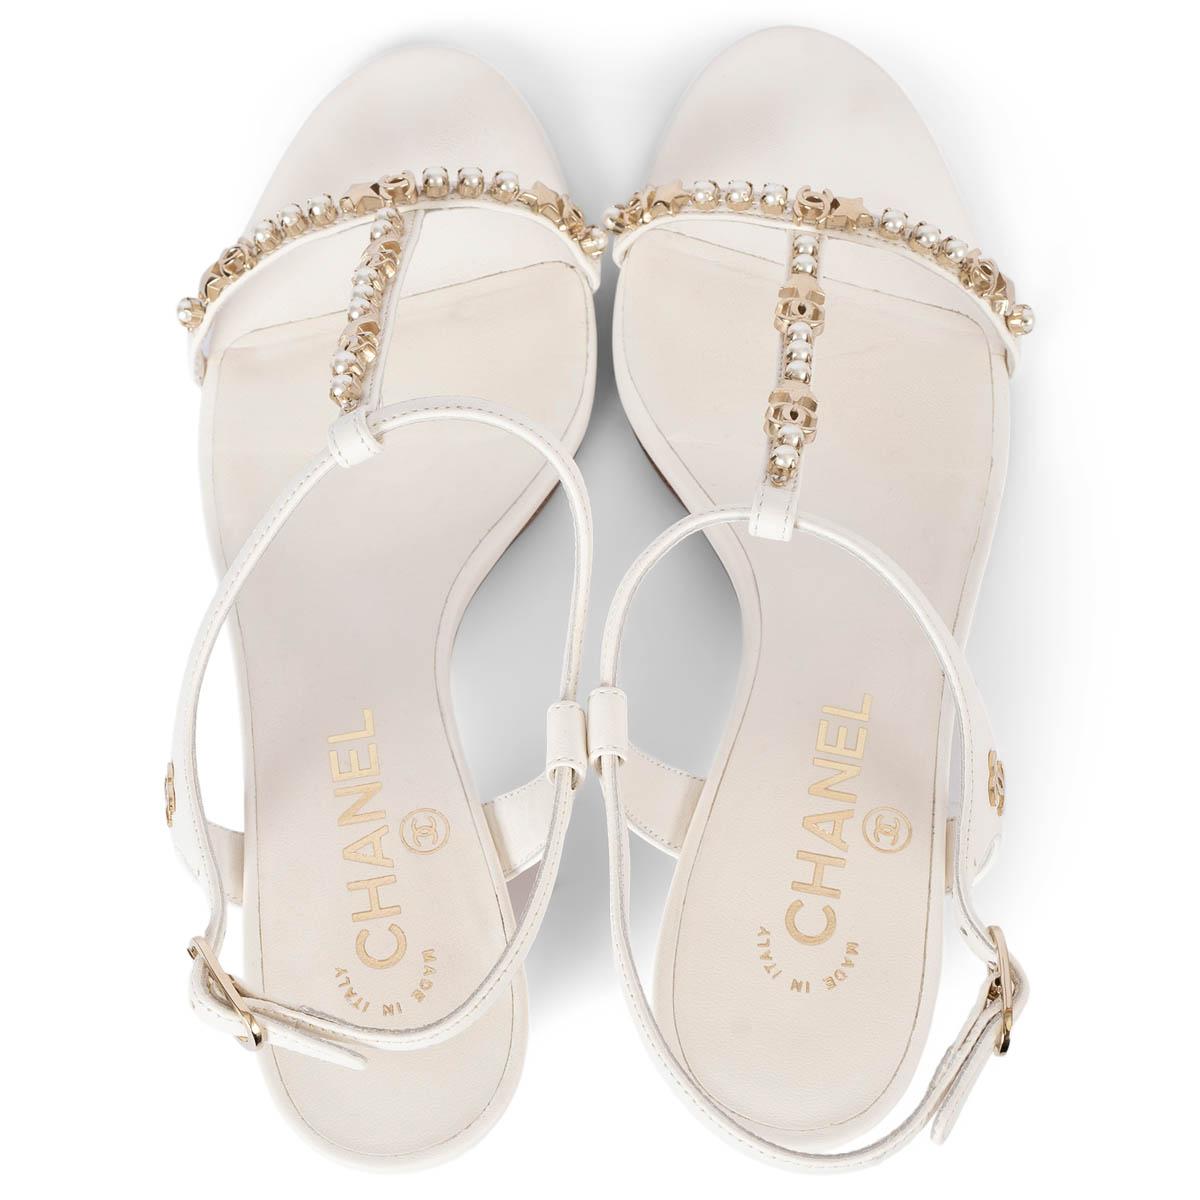 CHANEL white leather 2020 20S PEARL T-STRAP Sandals Shoes 38.5 2